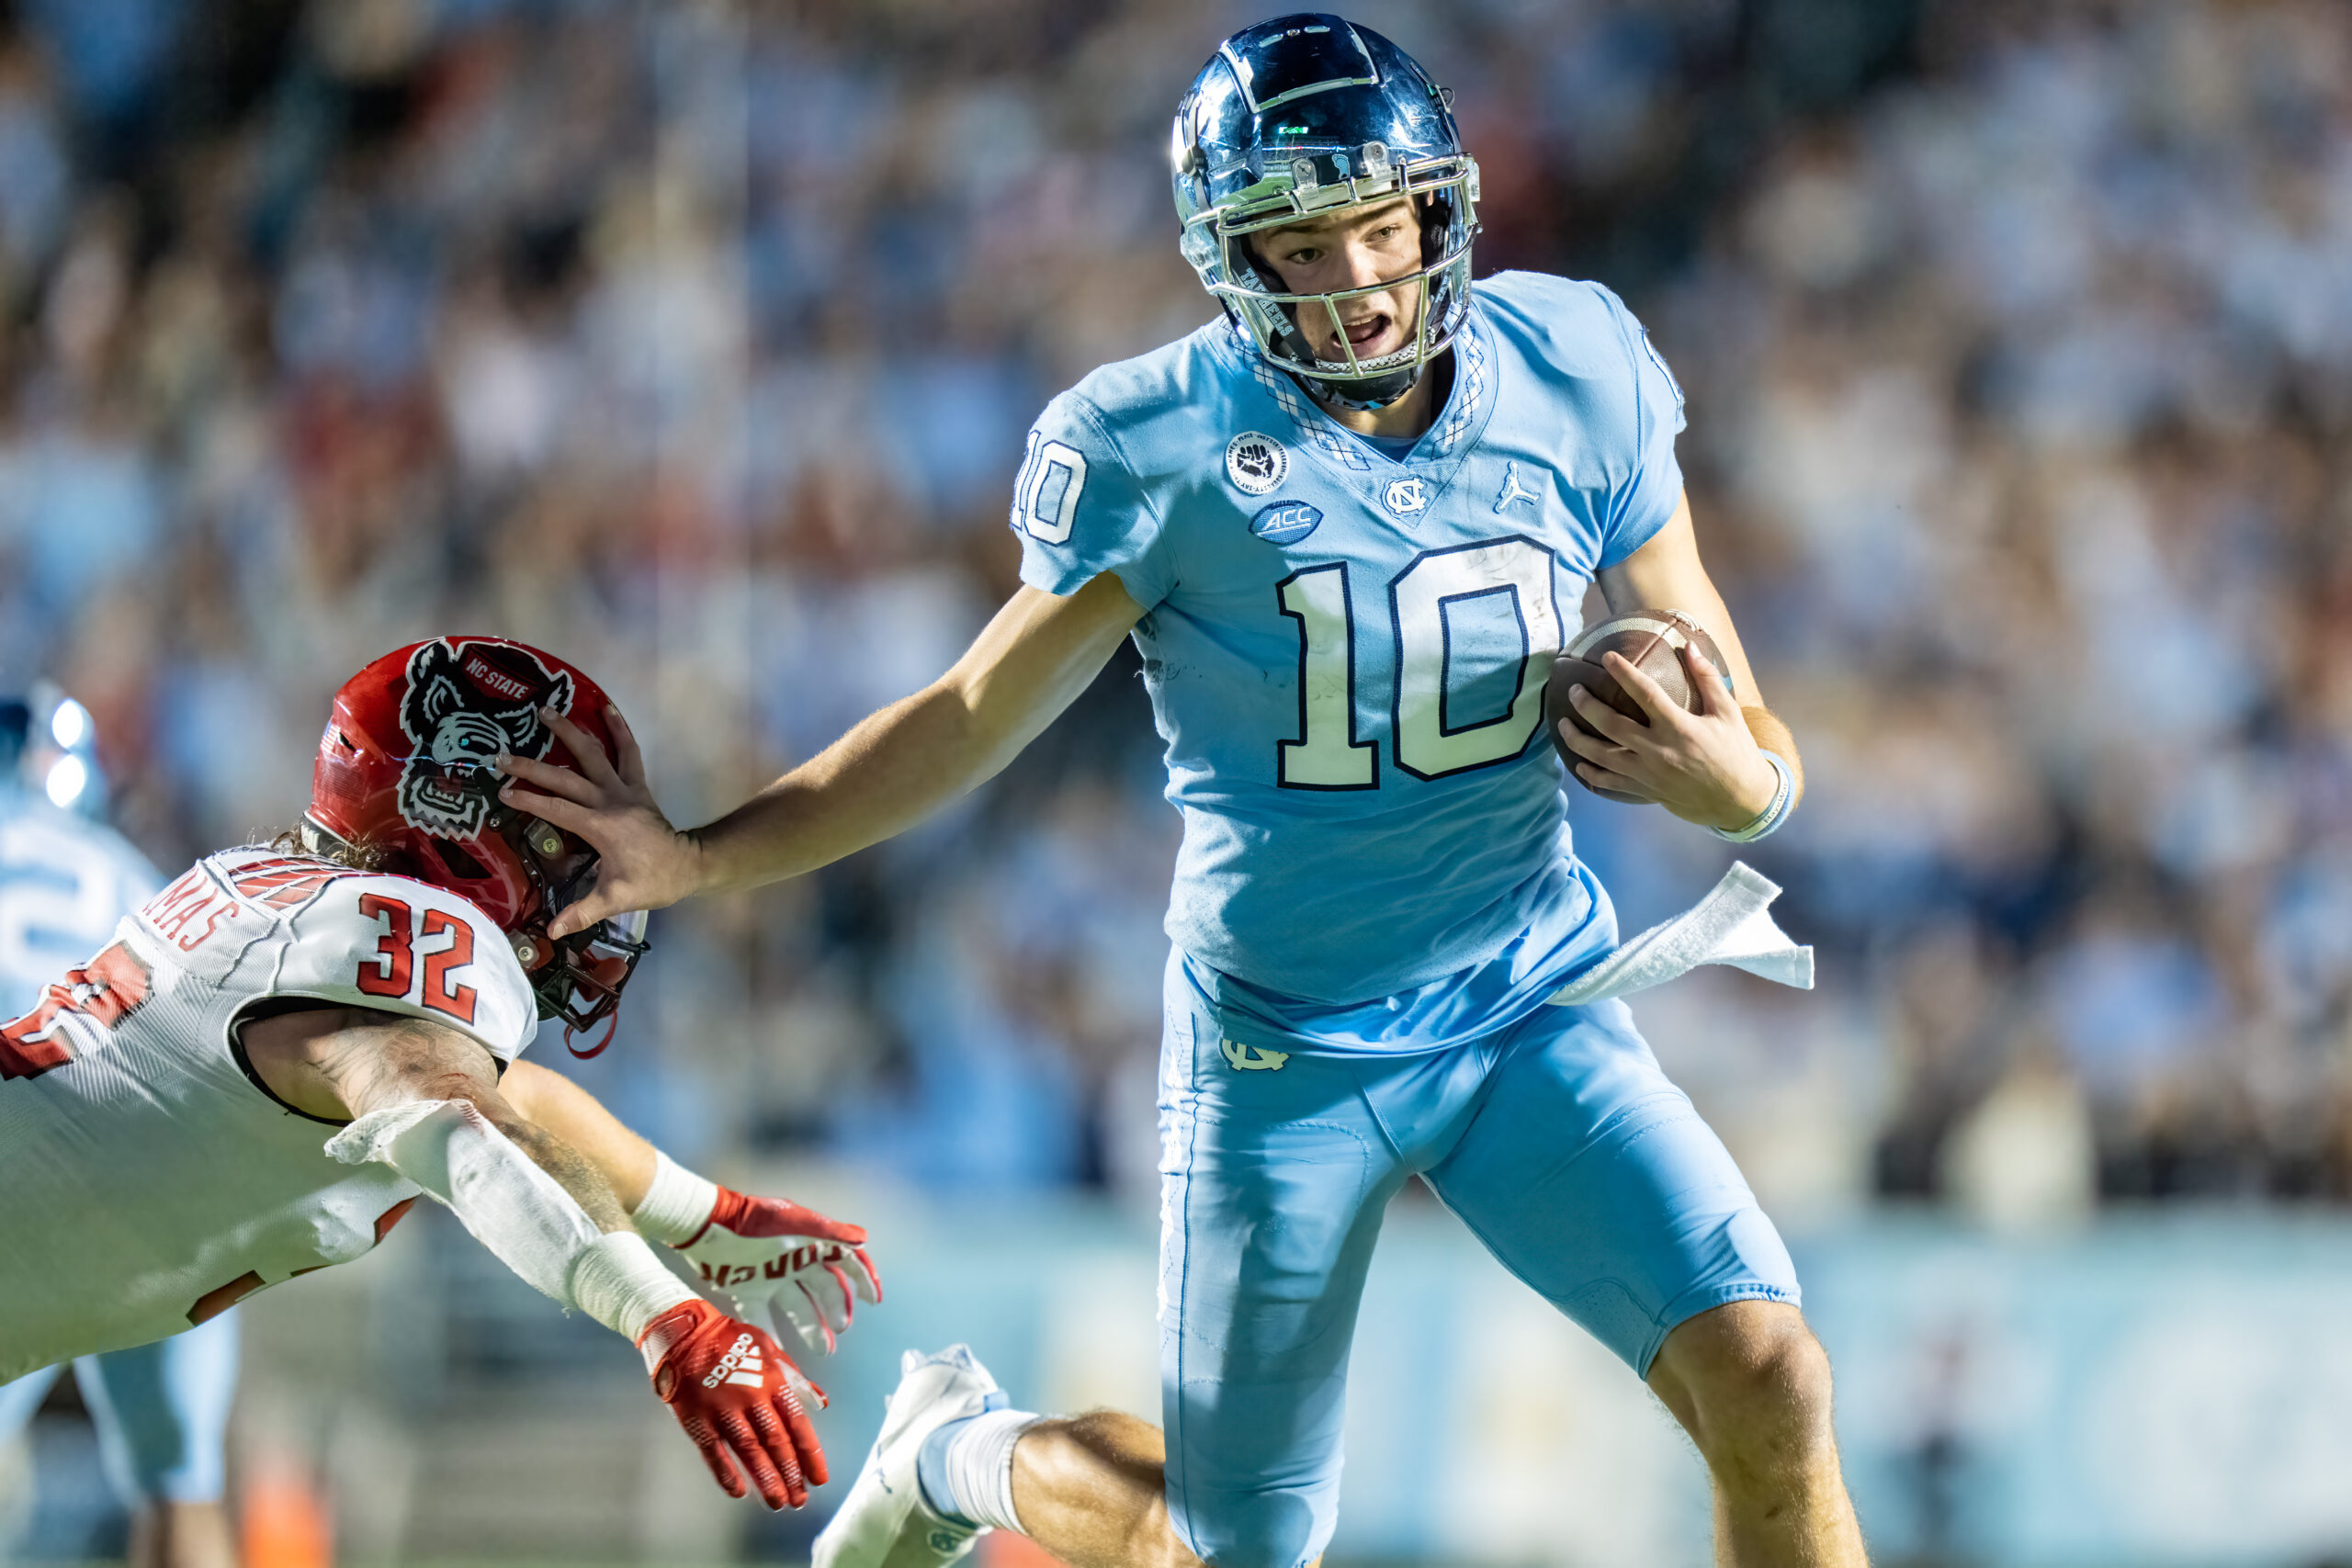 Complete Rundown of UNC Football Players on 2023 Award Watch Lists